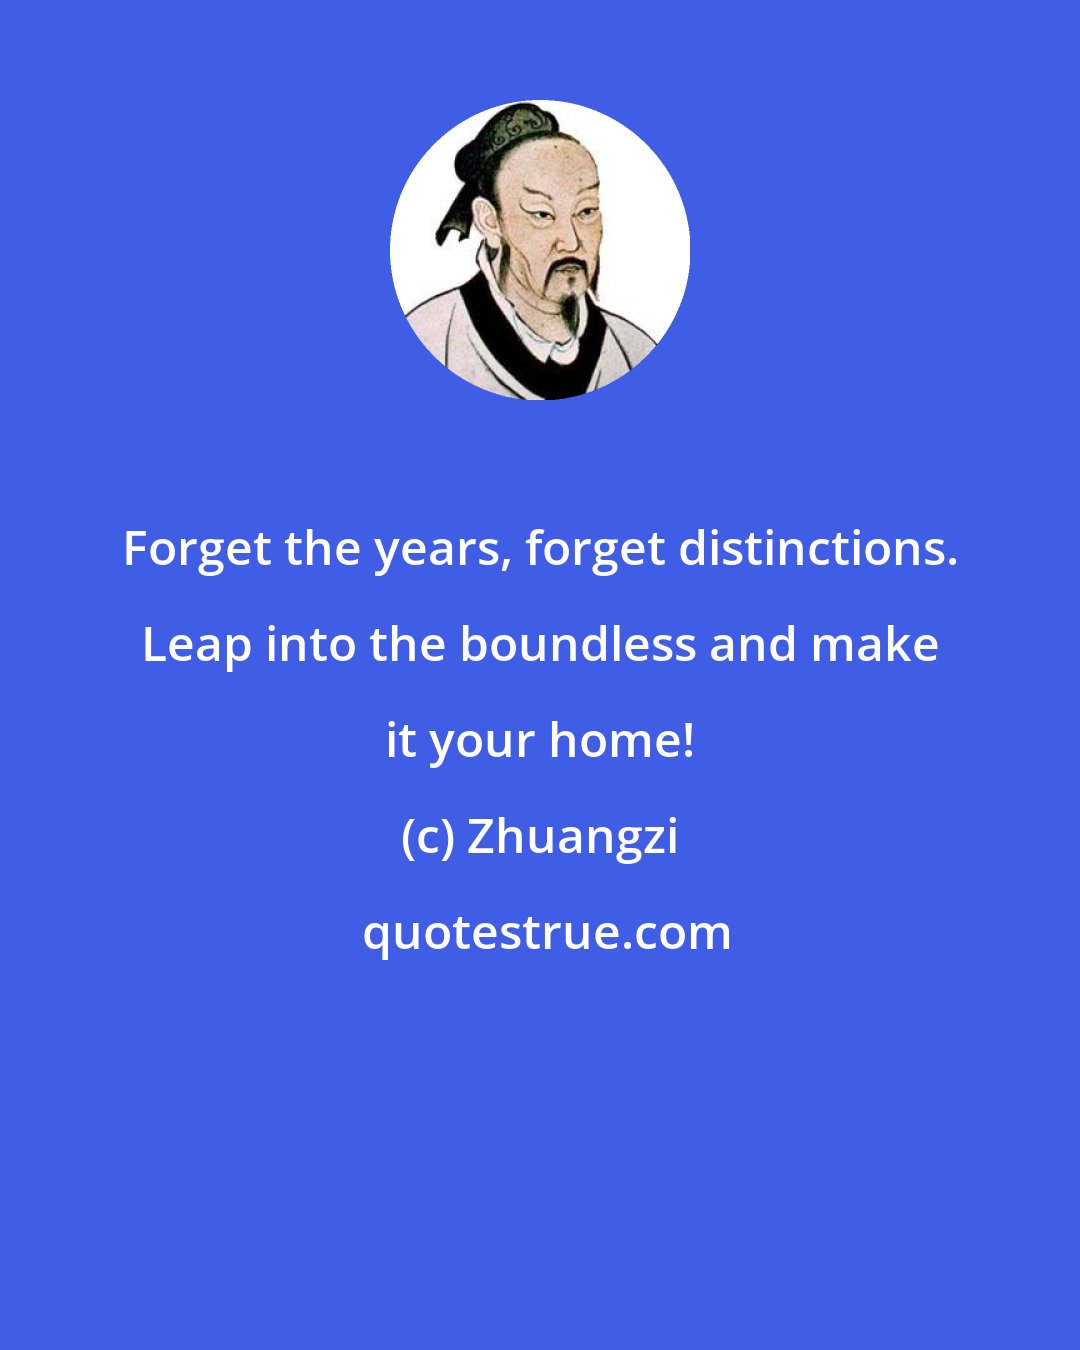 Zhuangzi: Forget the years, forget distinctions. Leap into the boundless and make it your home!